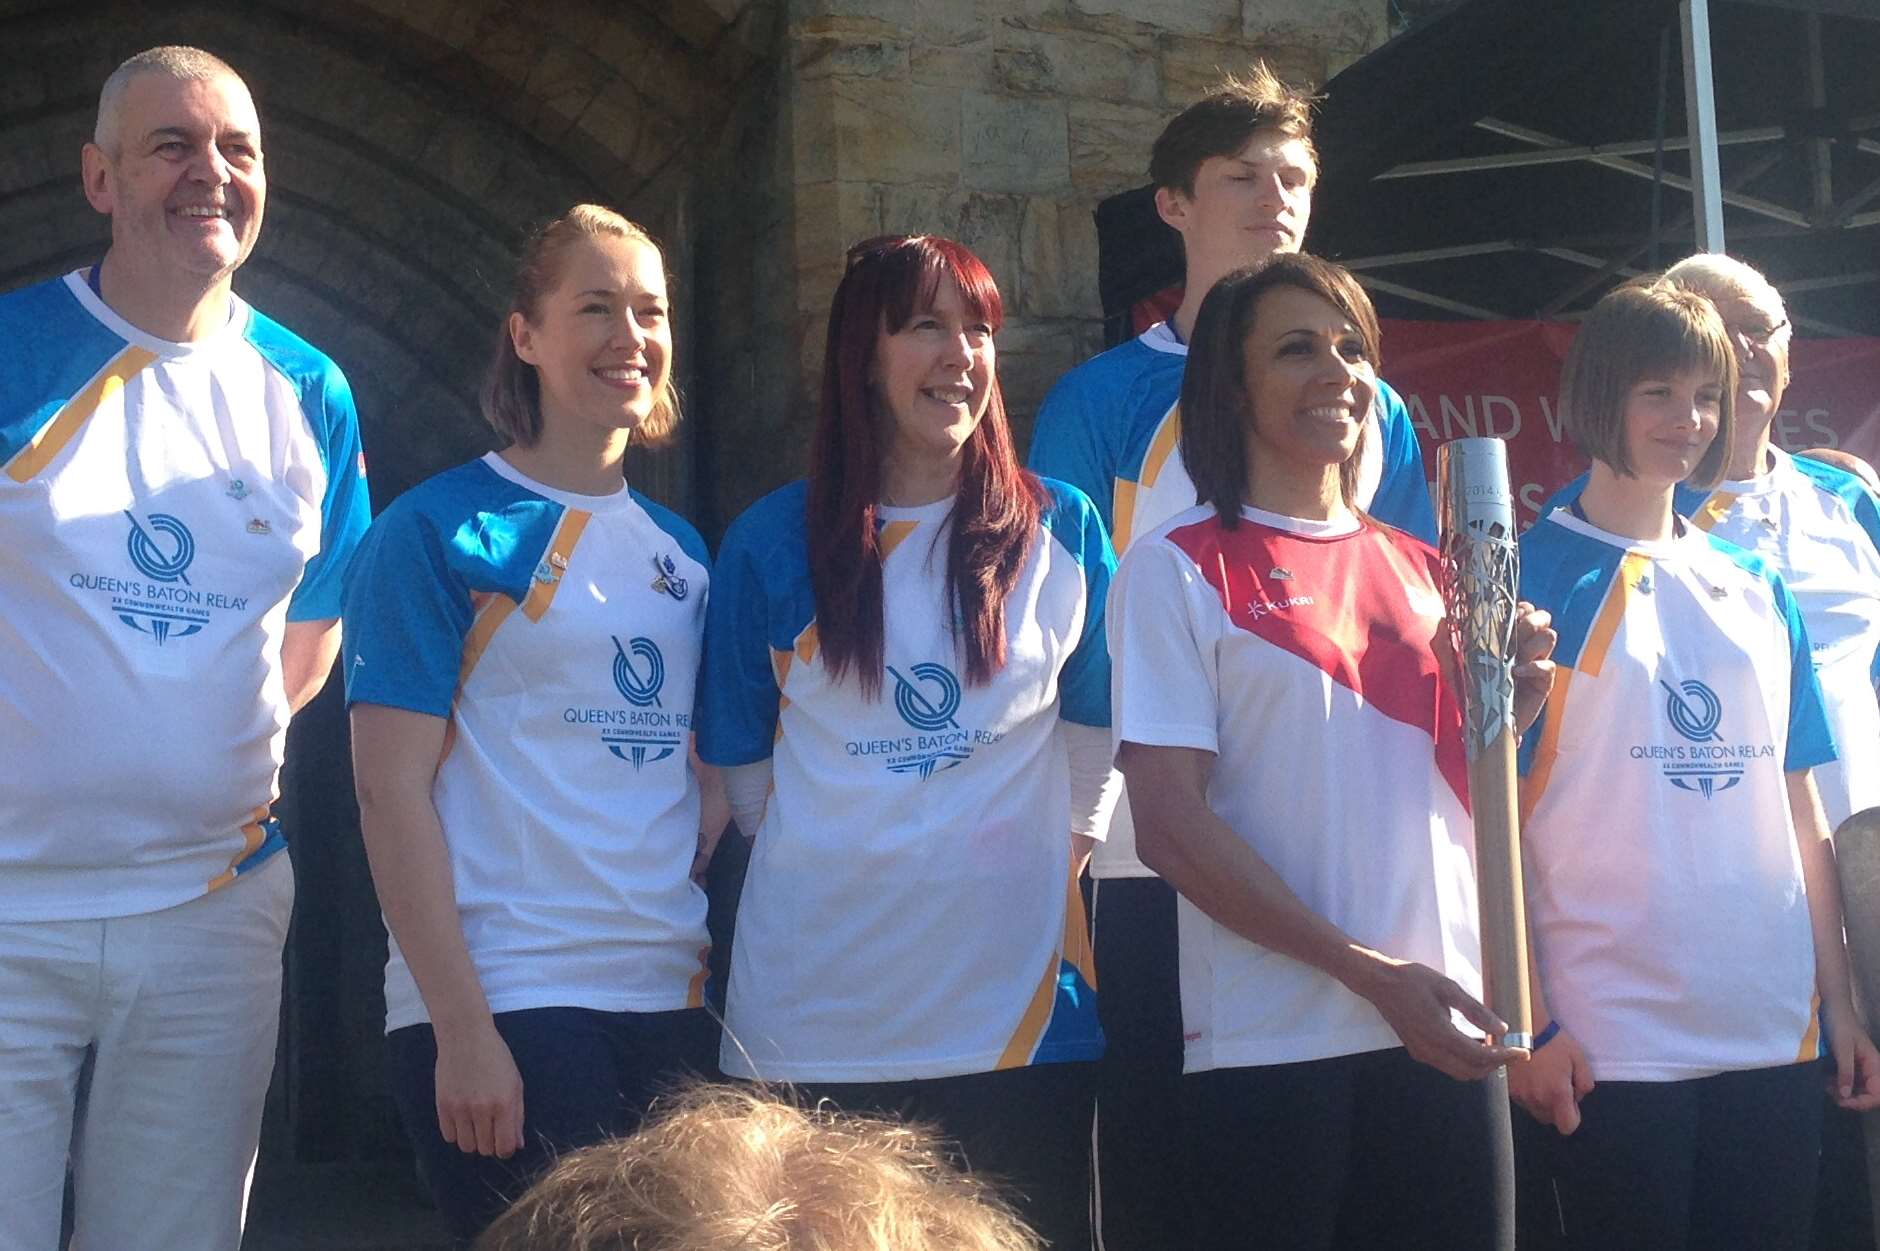 Baton bearers line up with the baton, including Dame Kelly Holmes